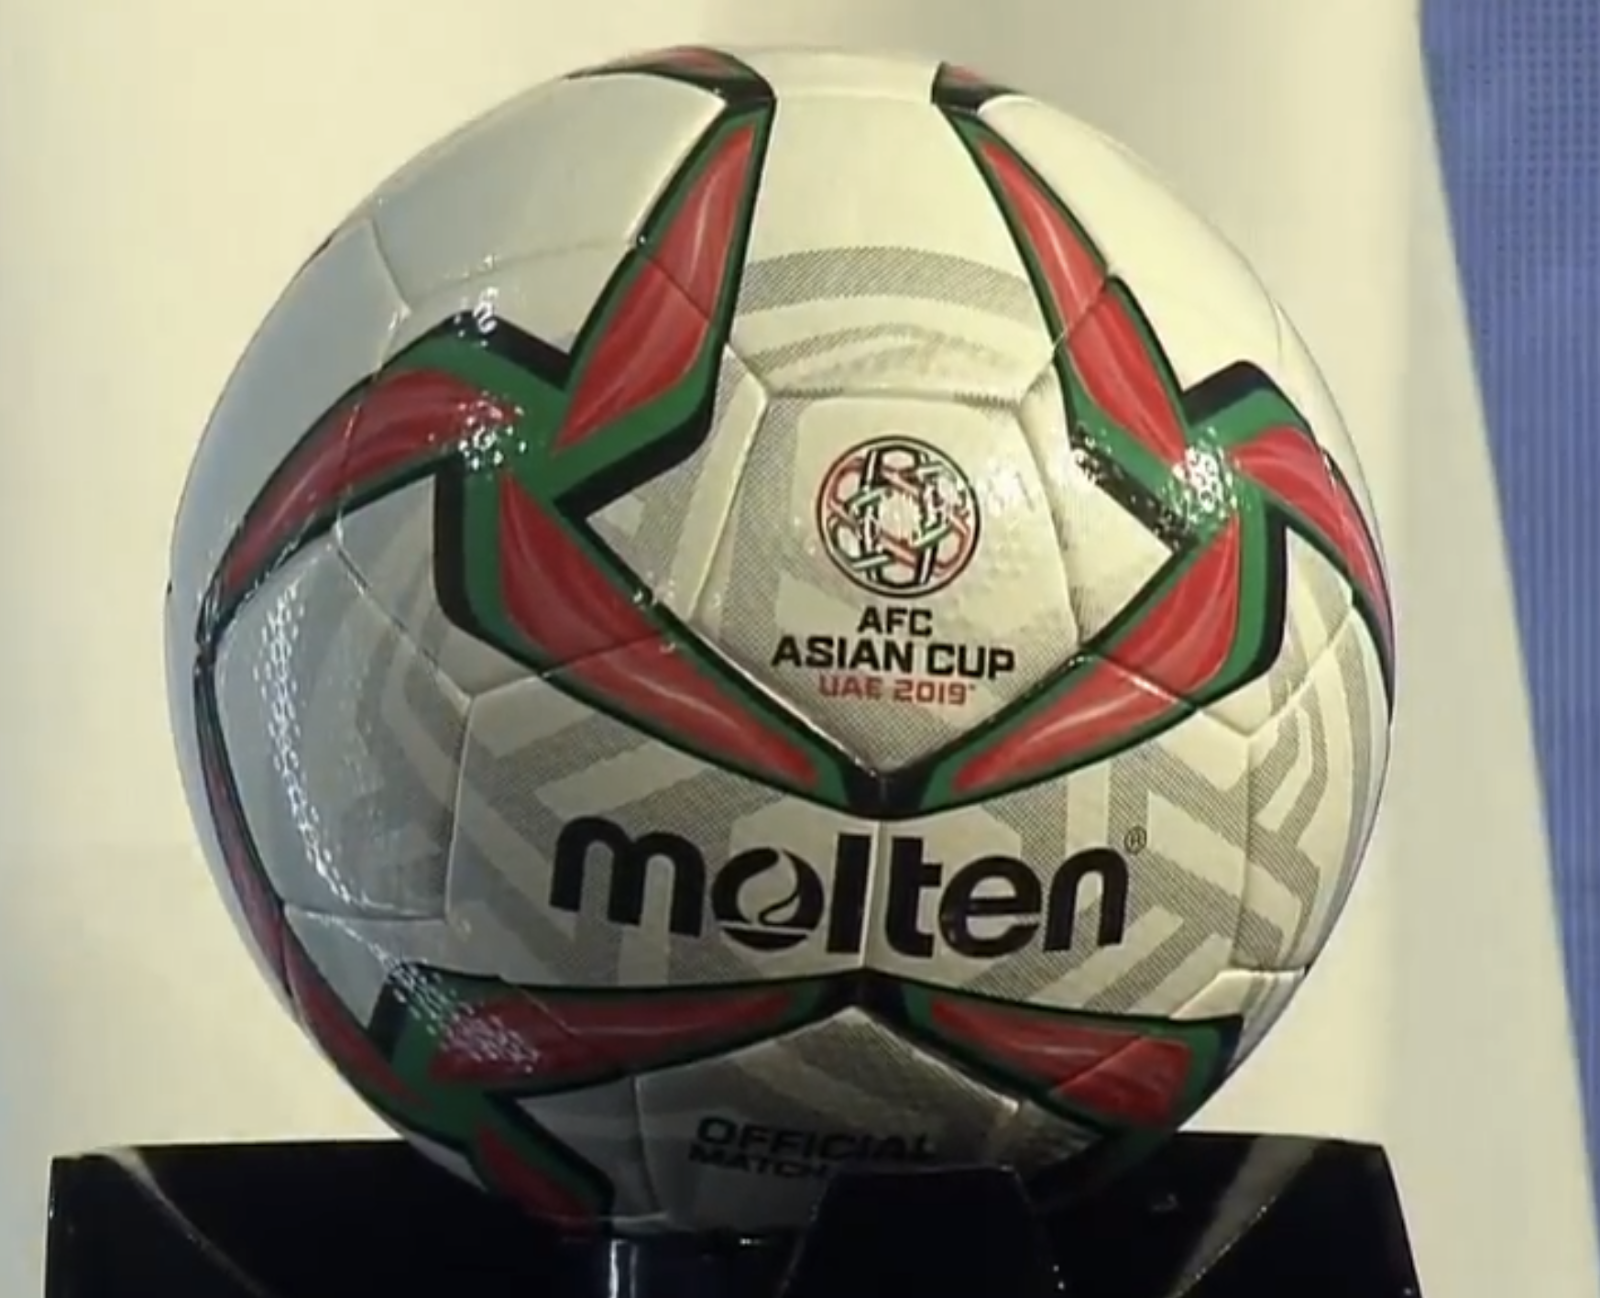 2019 AFC Asian Cup: Palestine land in Group of Death1600 x 1298